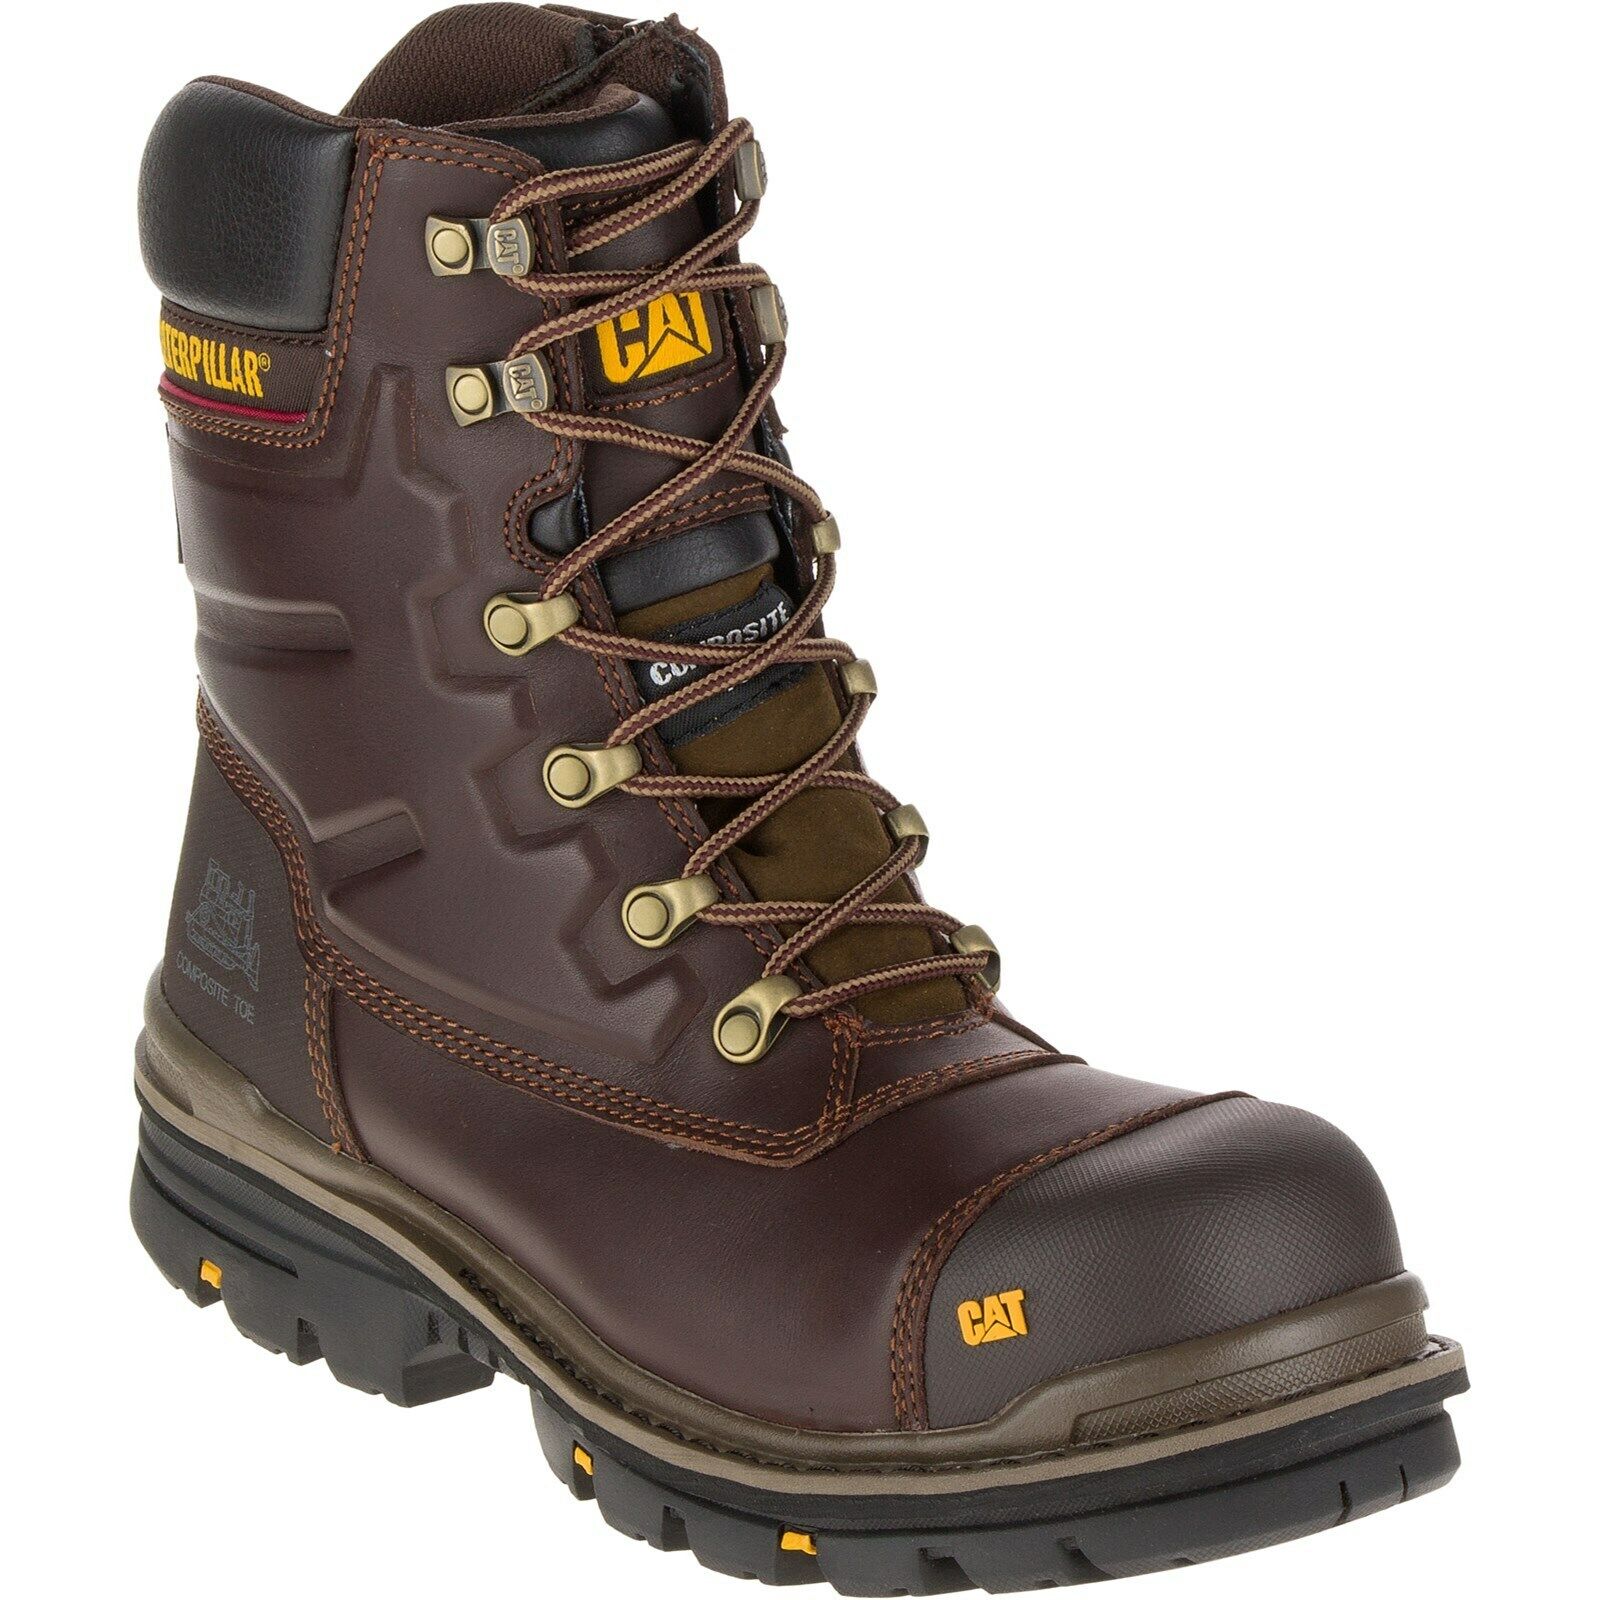 Pre-owned Caterpillar Cat  Premier Mens Safety Boots Waterproof Industrial Leather Work In Brown